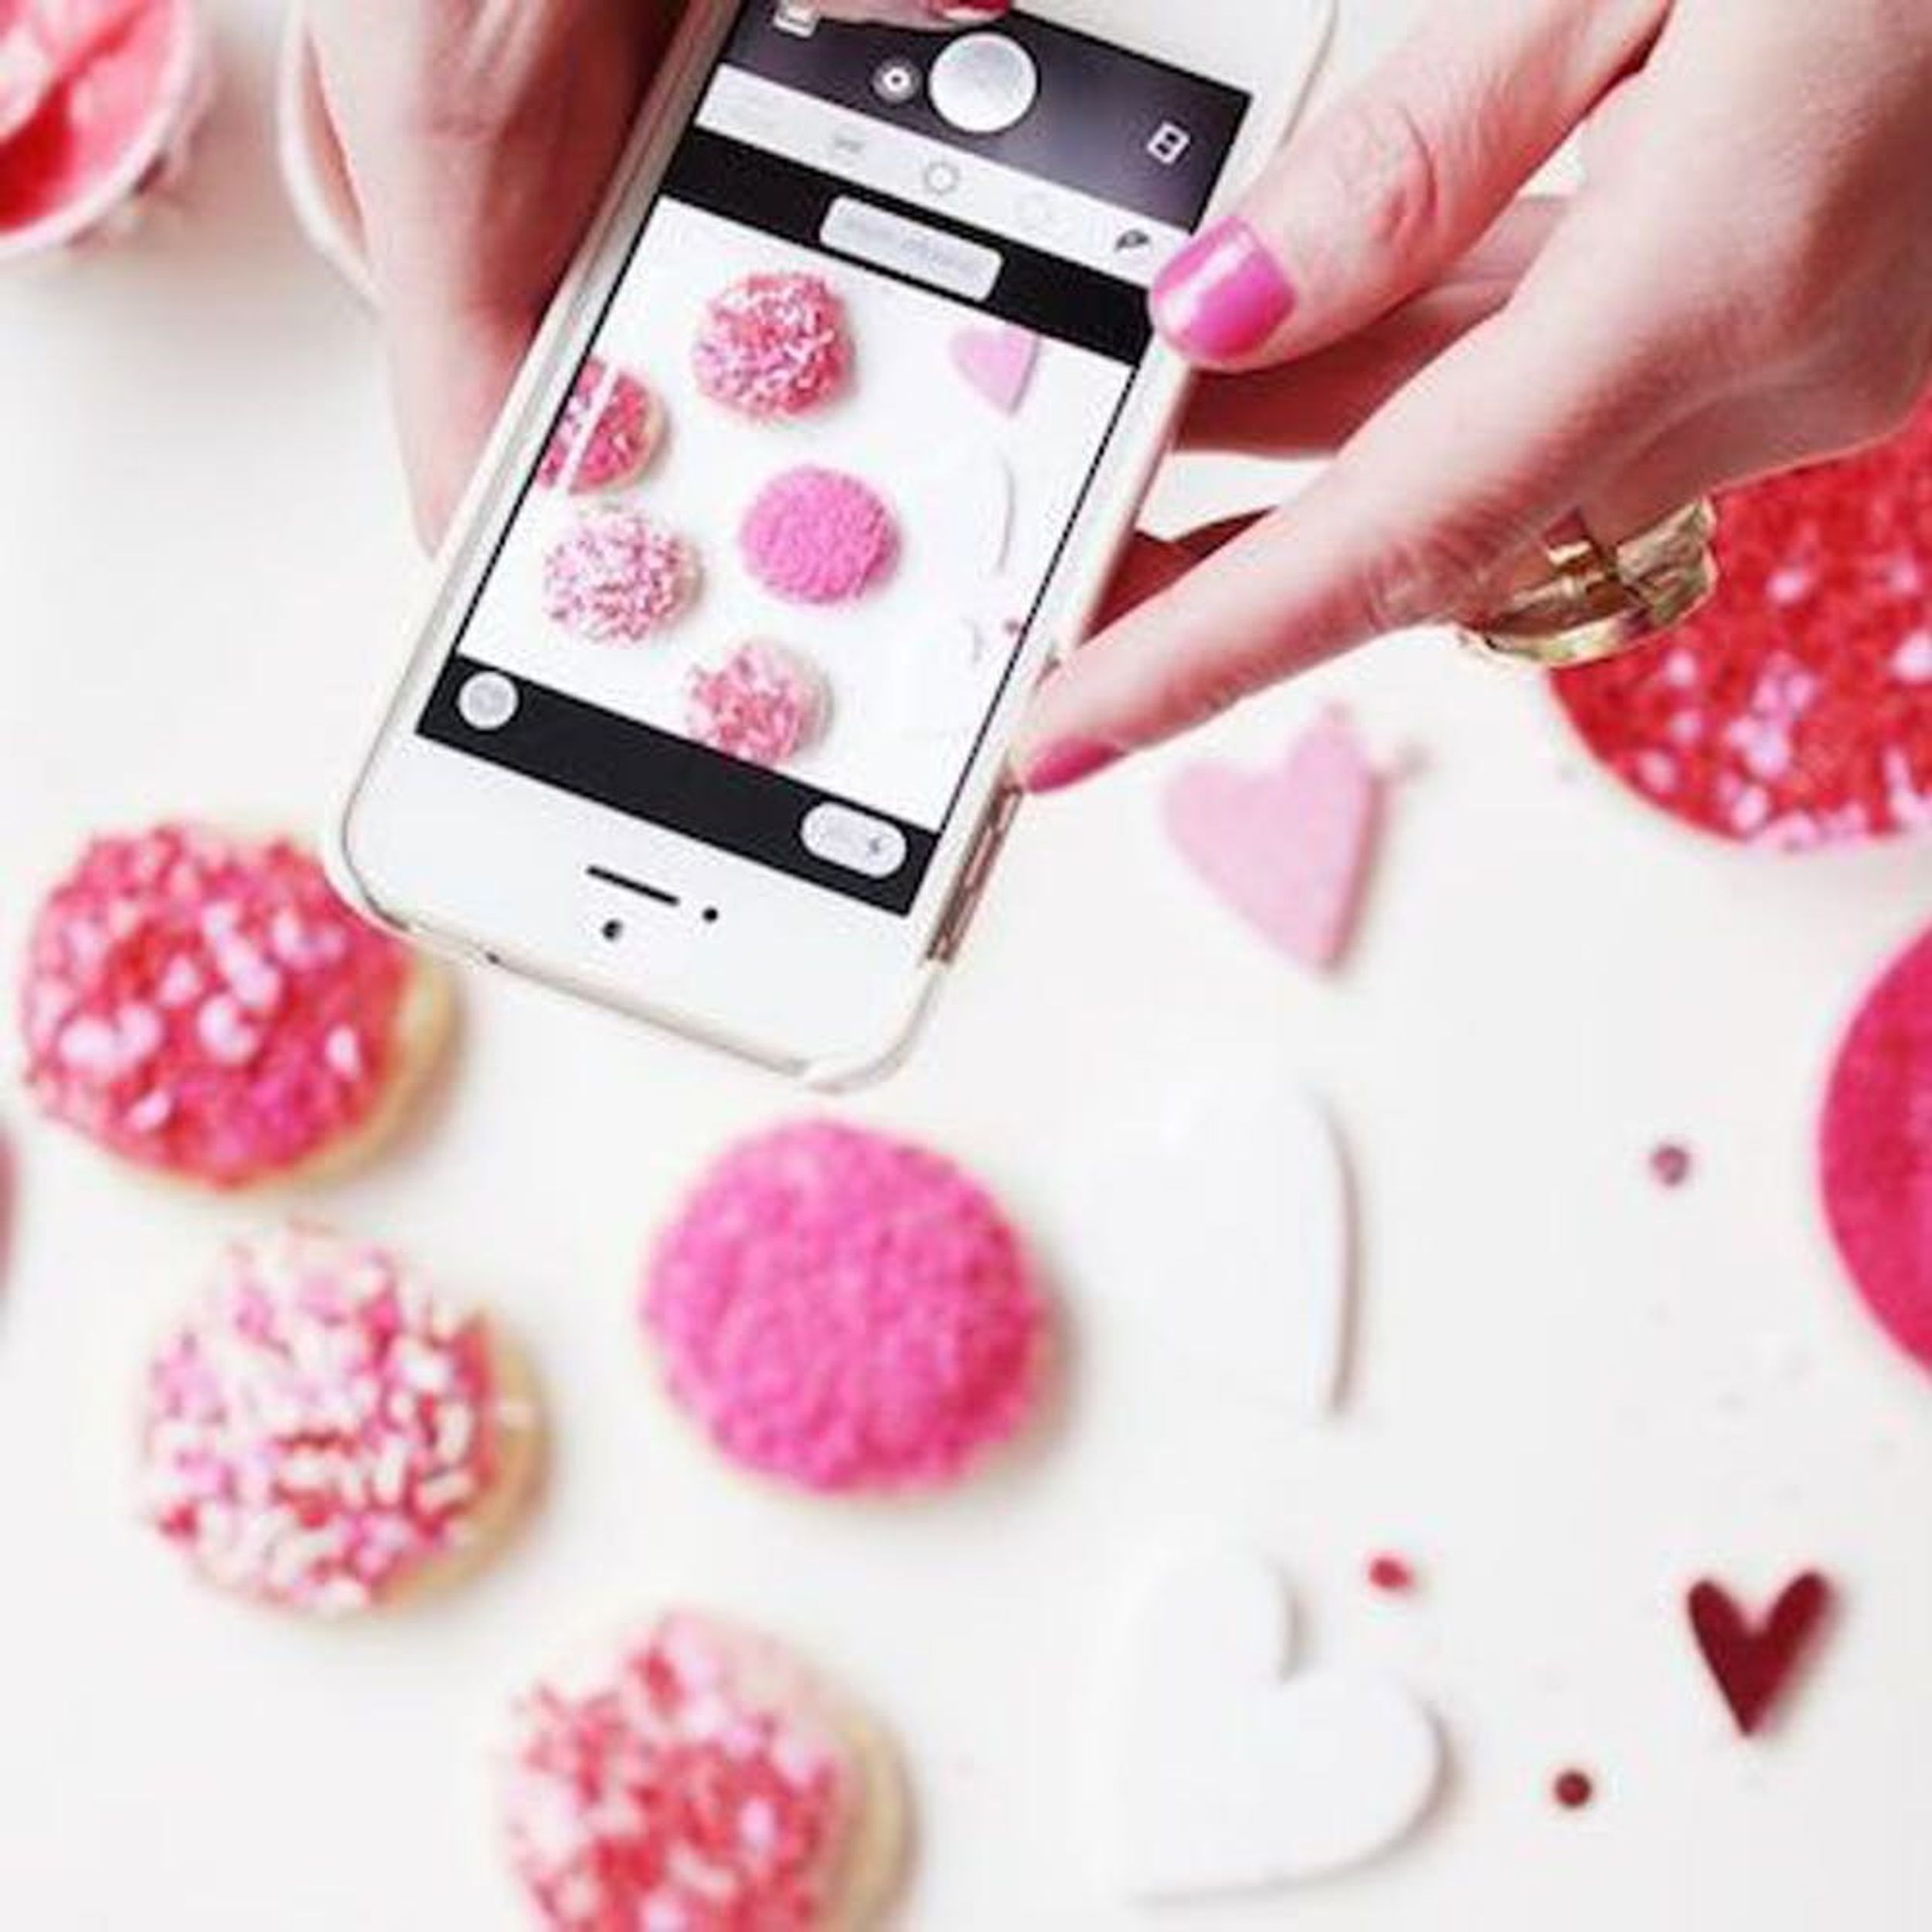 15 Tips to Turn You Into an Instagram Pro